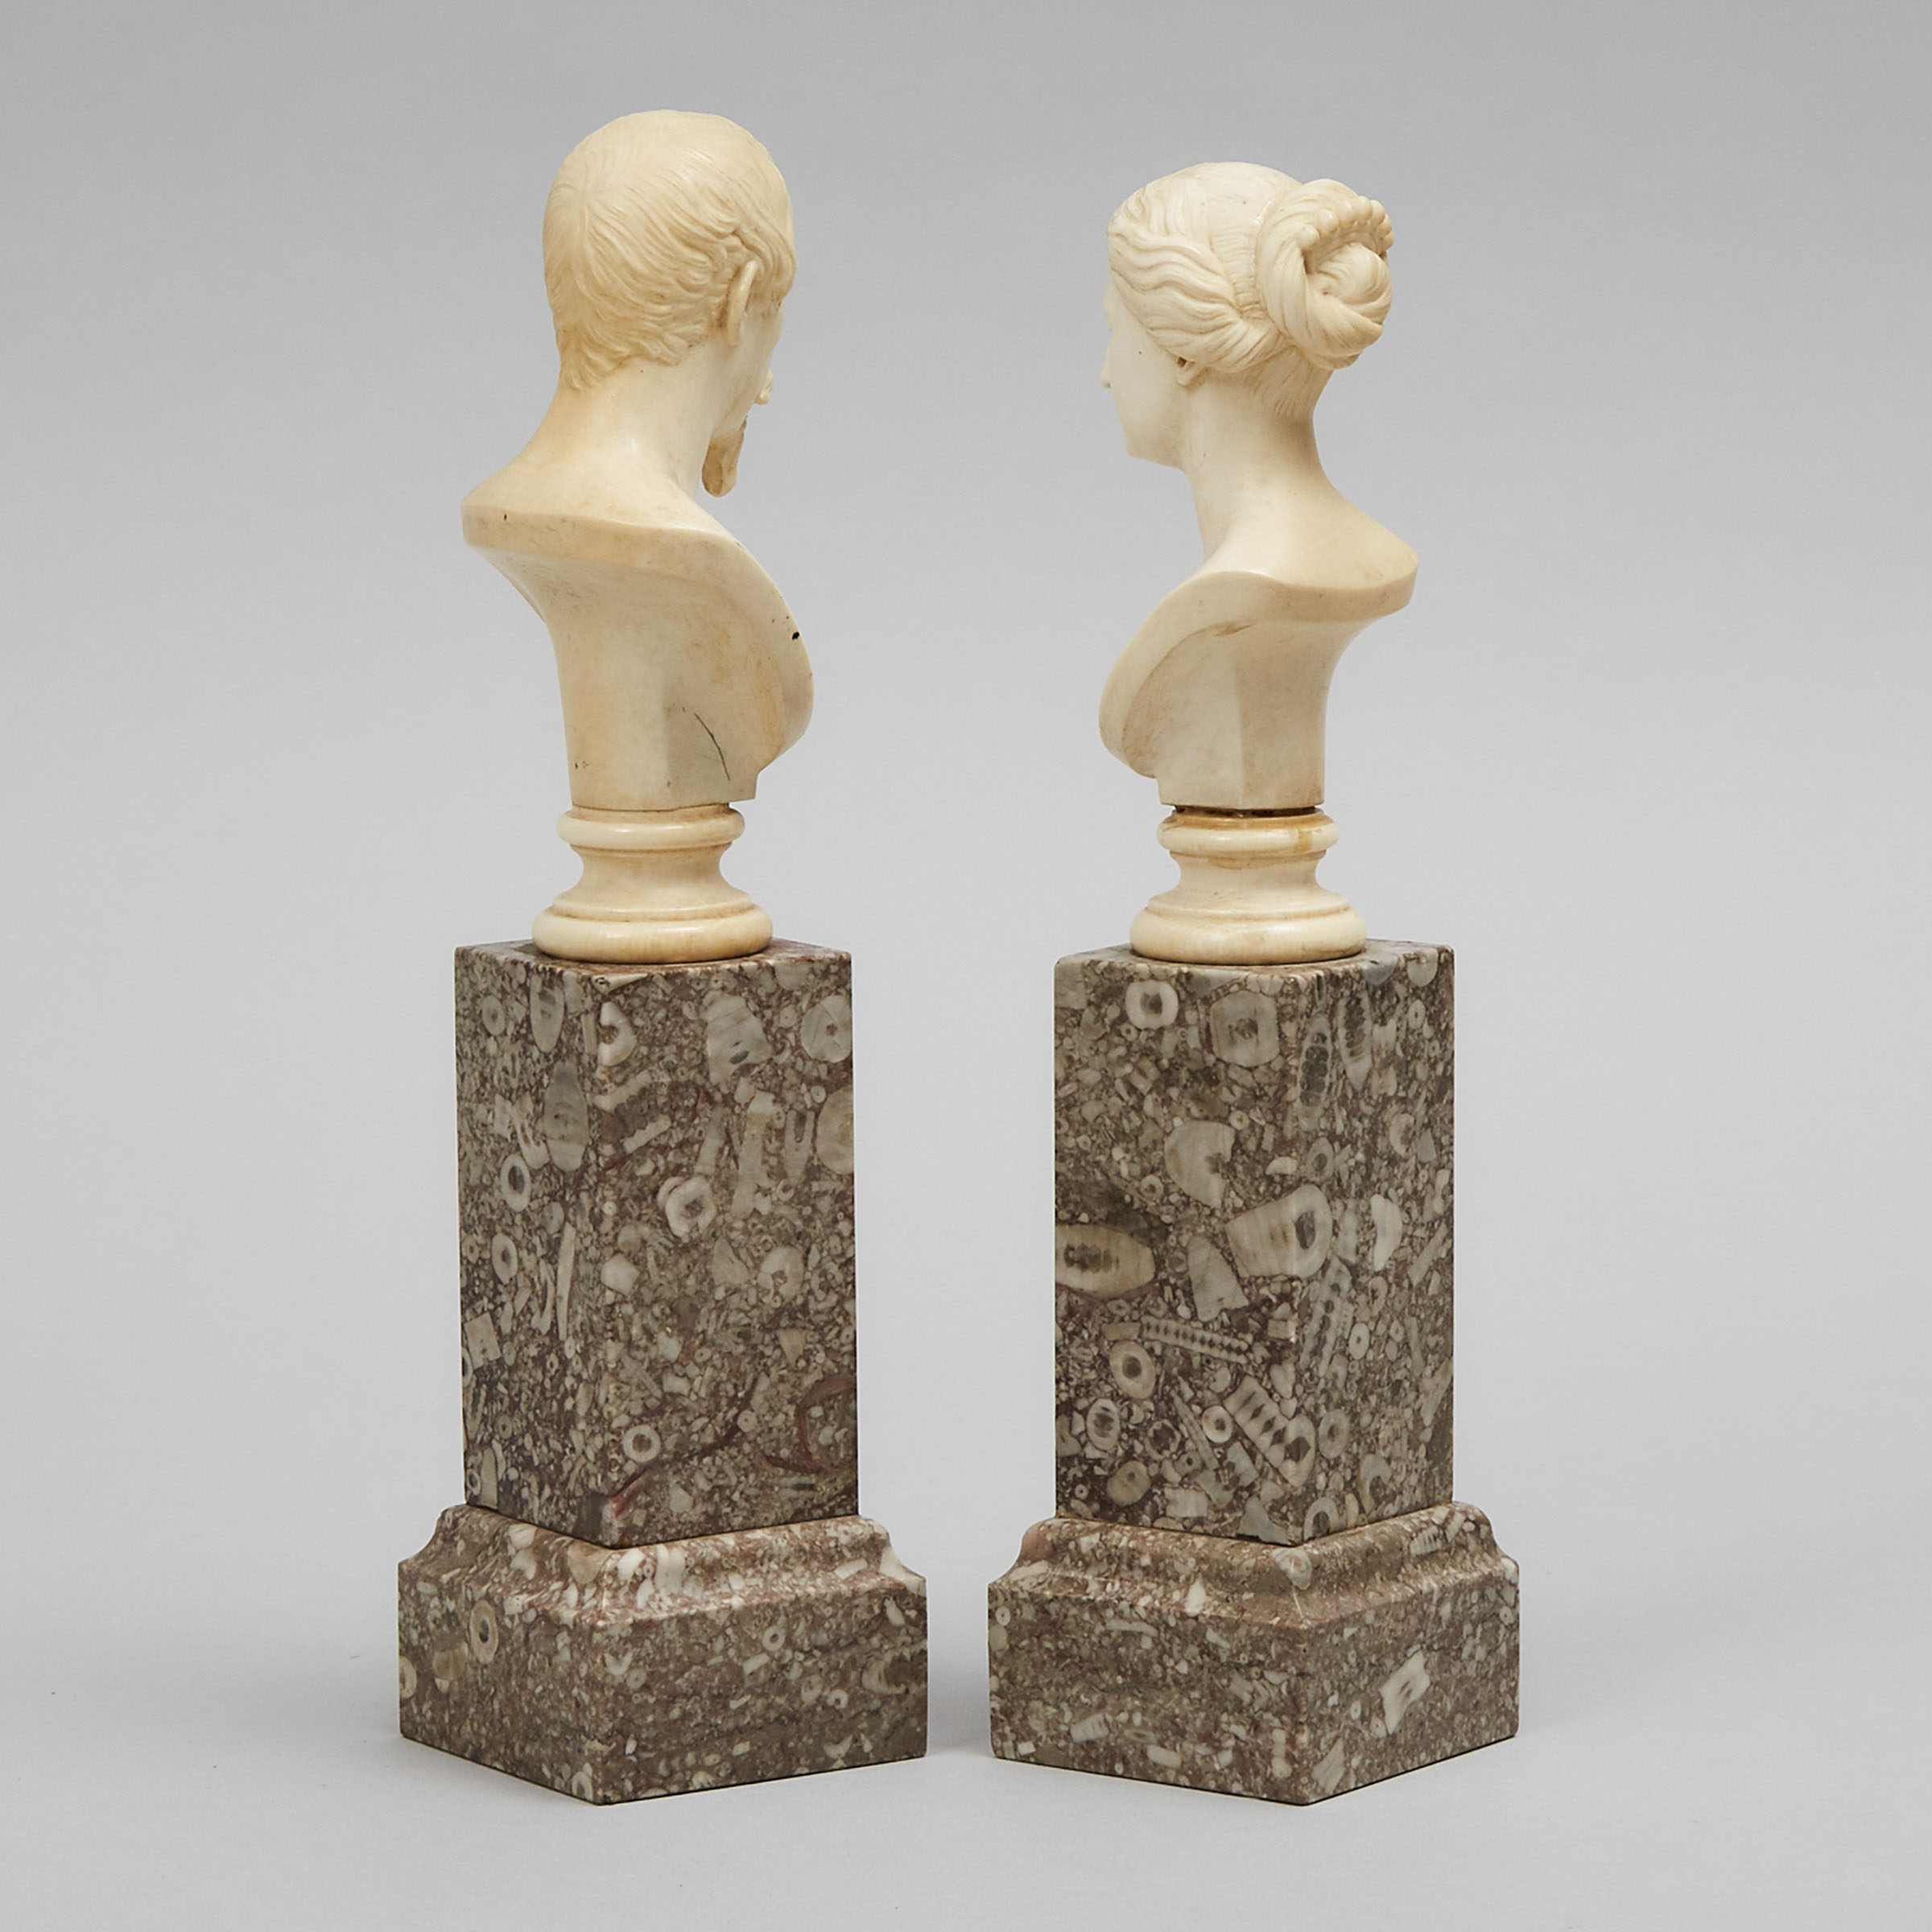 Pair of French Miniature Ivory Busts of Emperor Napoleon III and Empress Eugenie, c.1860